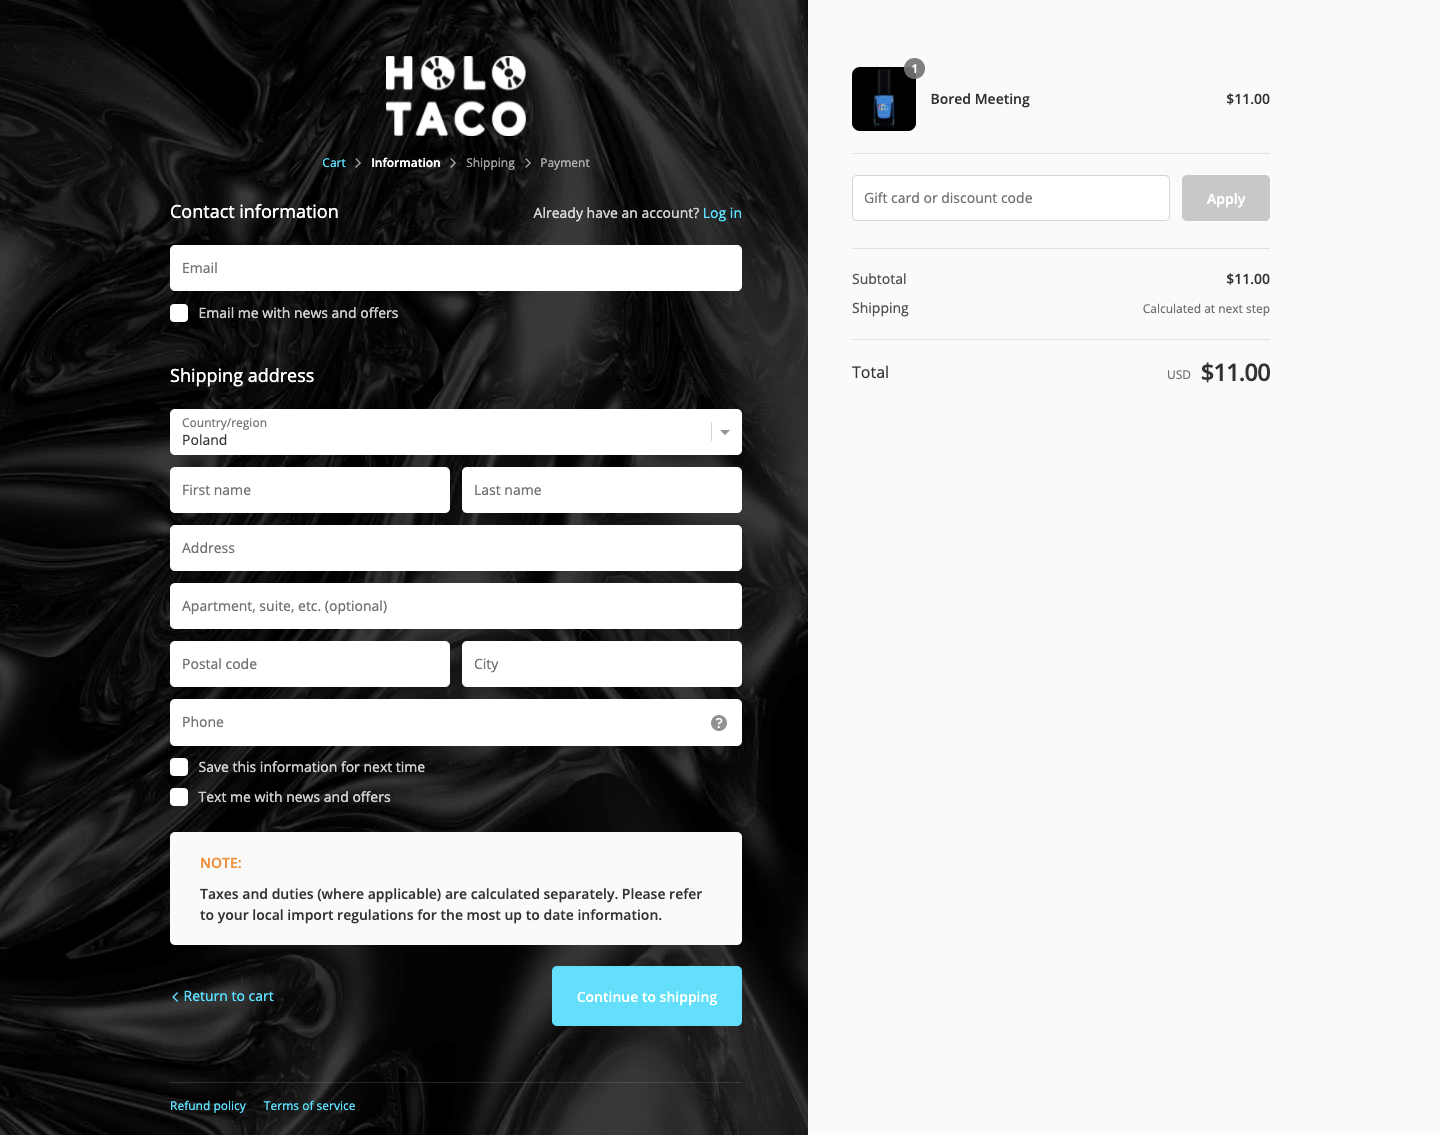 HoloTaco branded checkout page